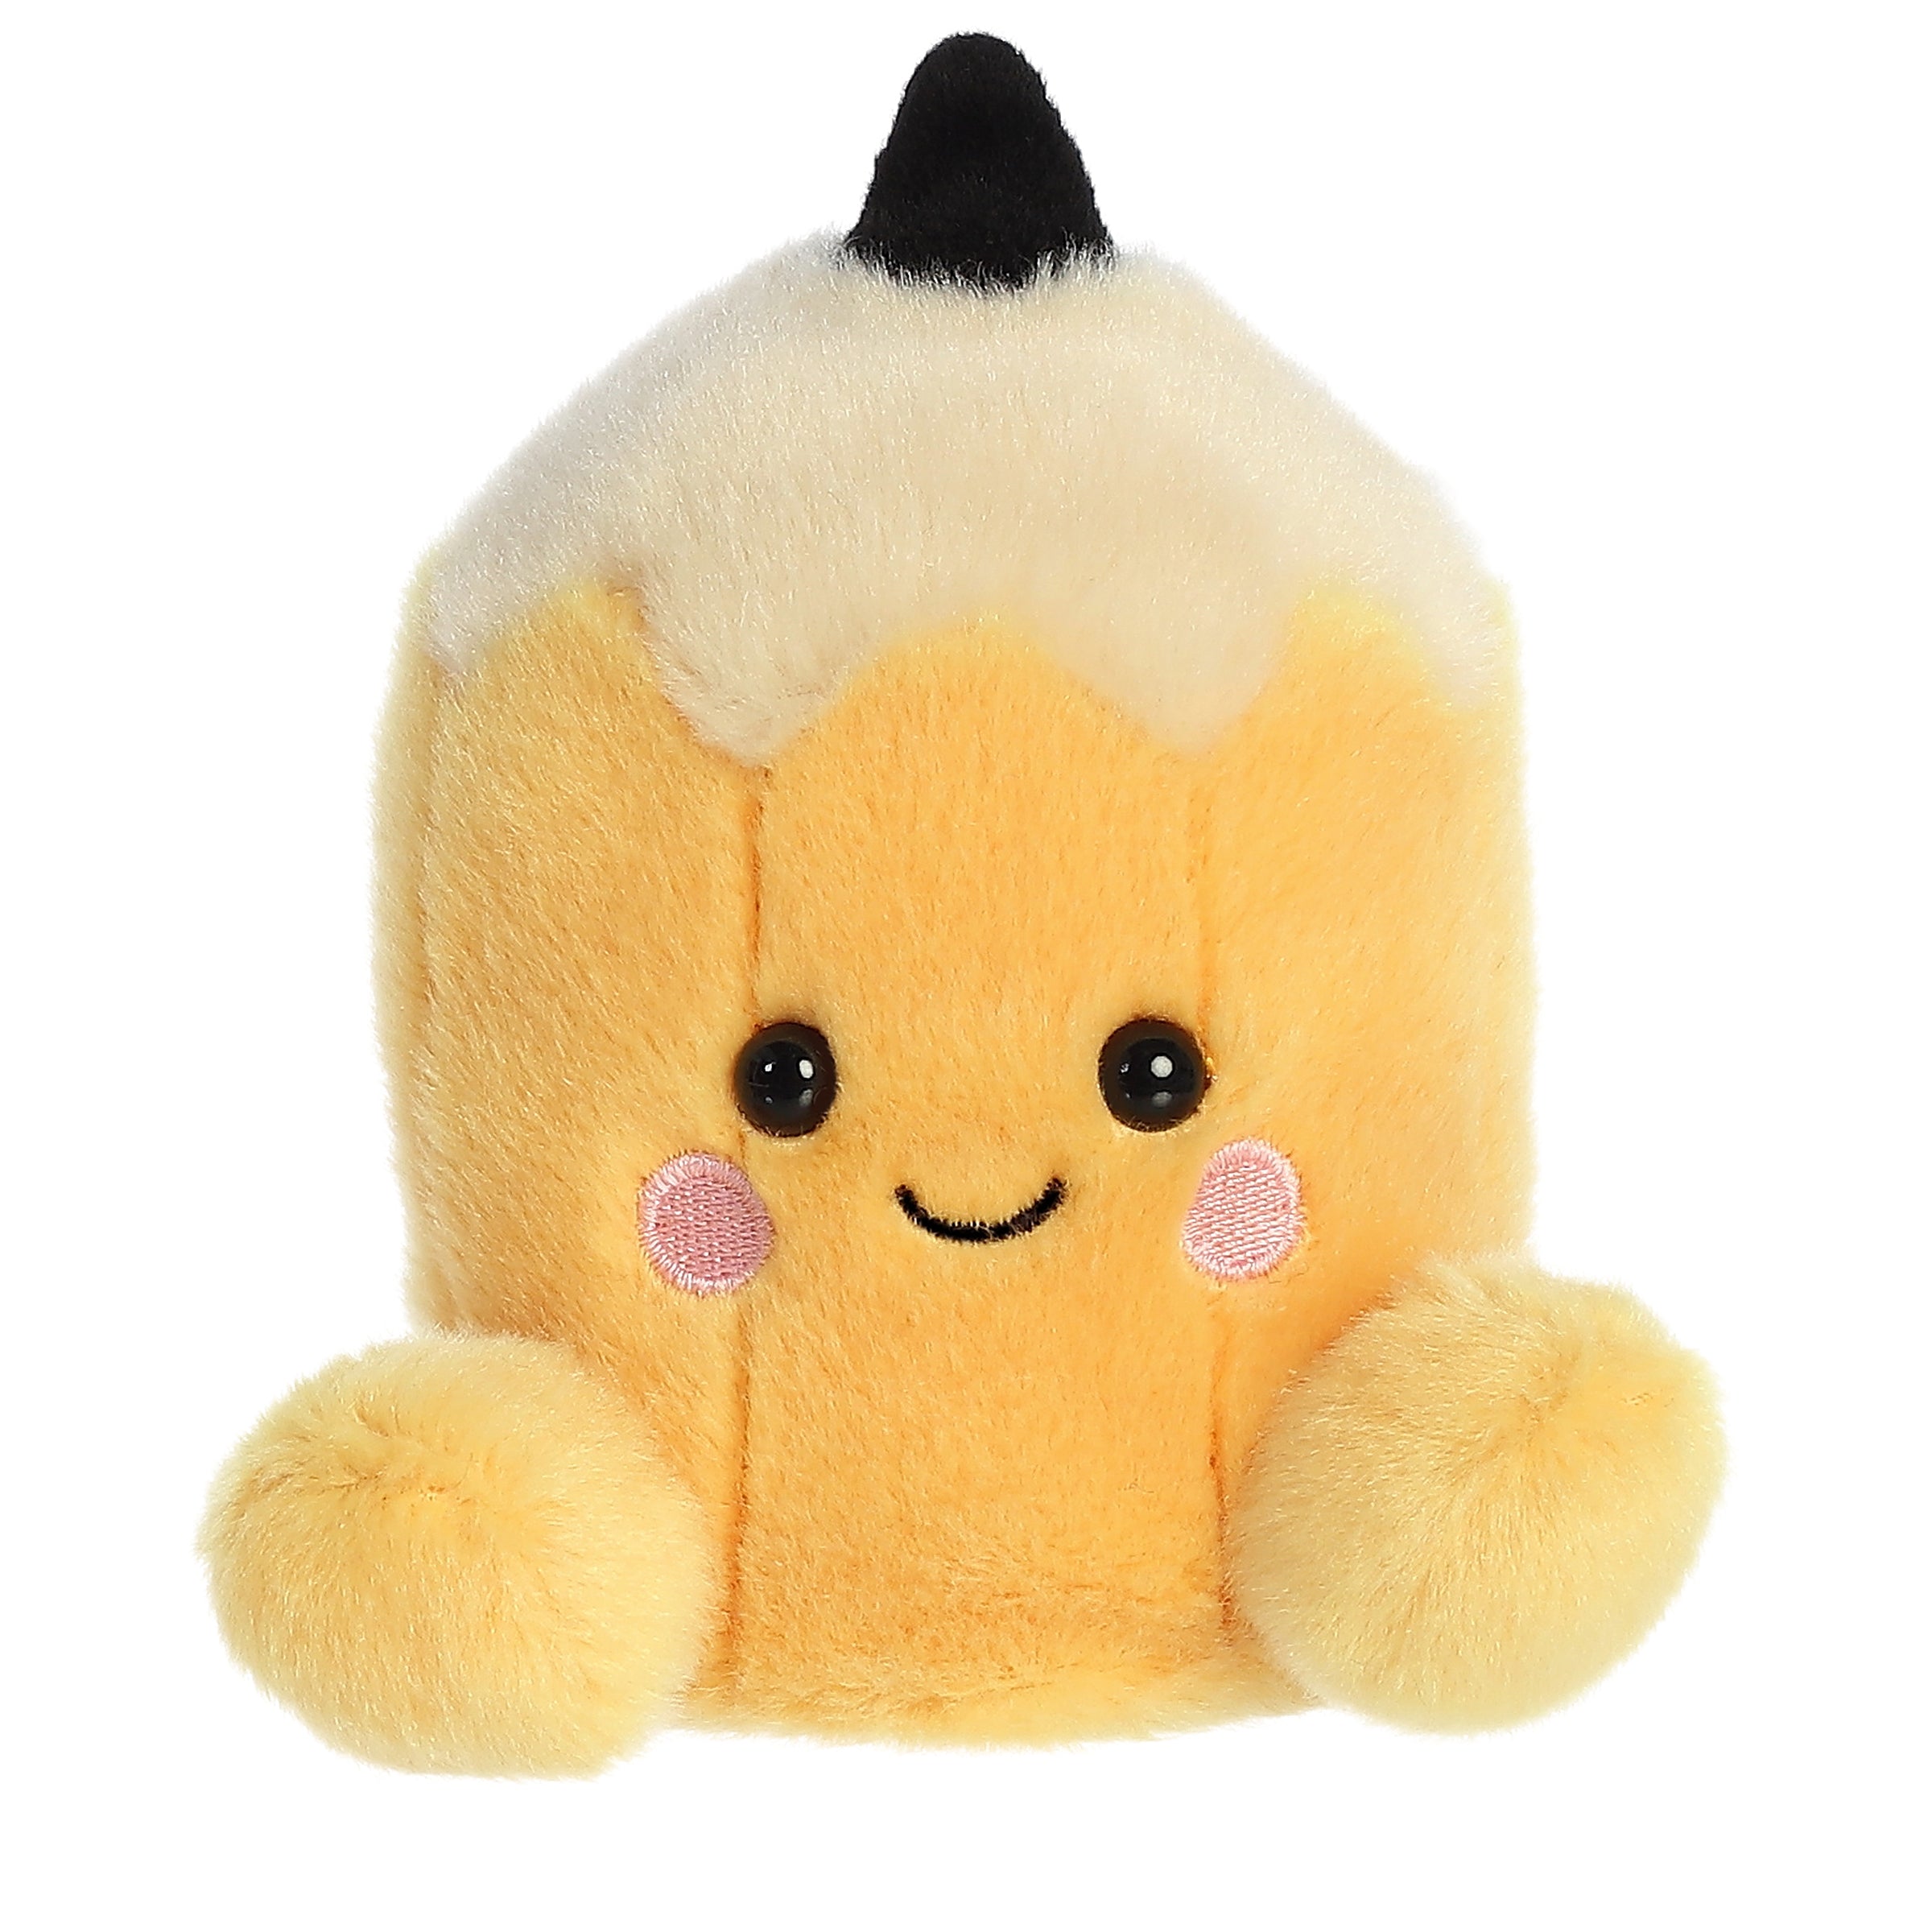 Tike Pencil plush from Palm Pals, featuring a yellow body and pink eraser, symbolizes creativity, with a cute smile!